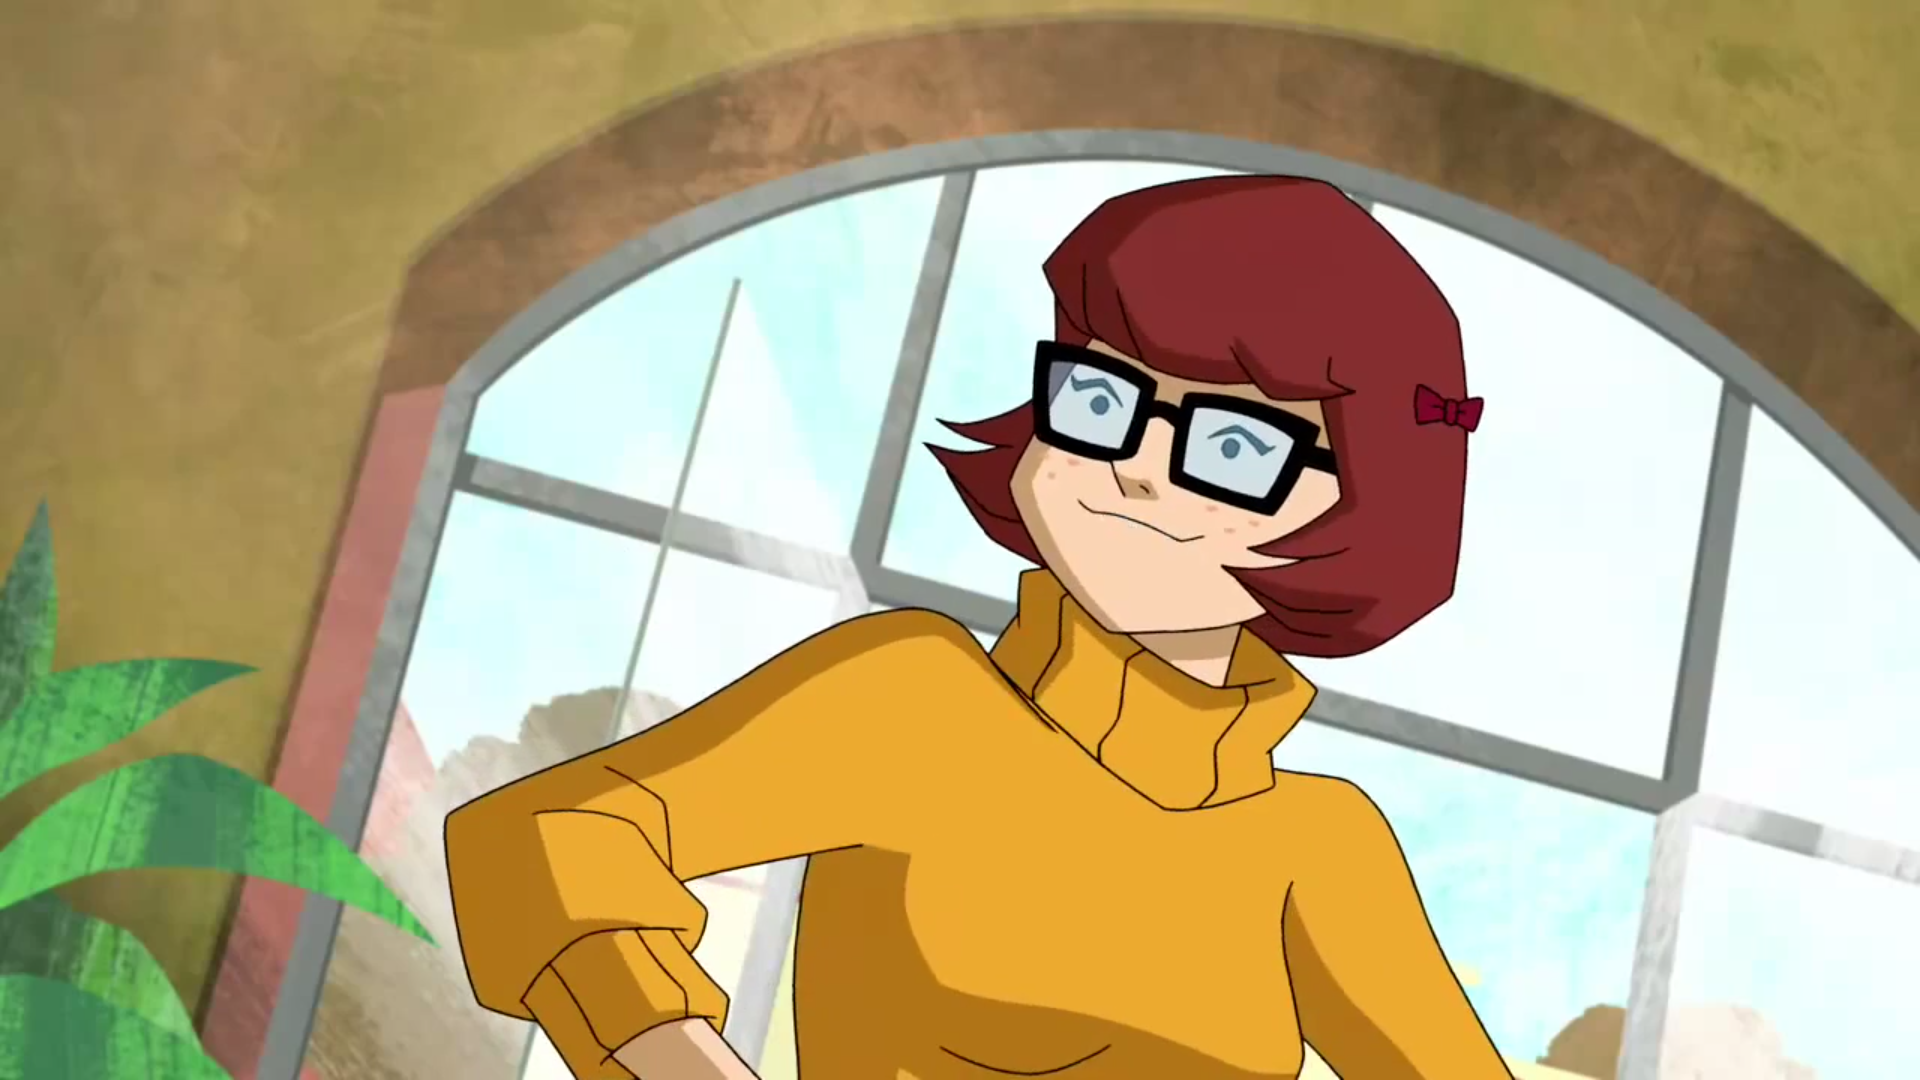 Scooby Doo Producers Confirm Character Velma Dinkley Is Gay 